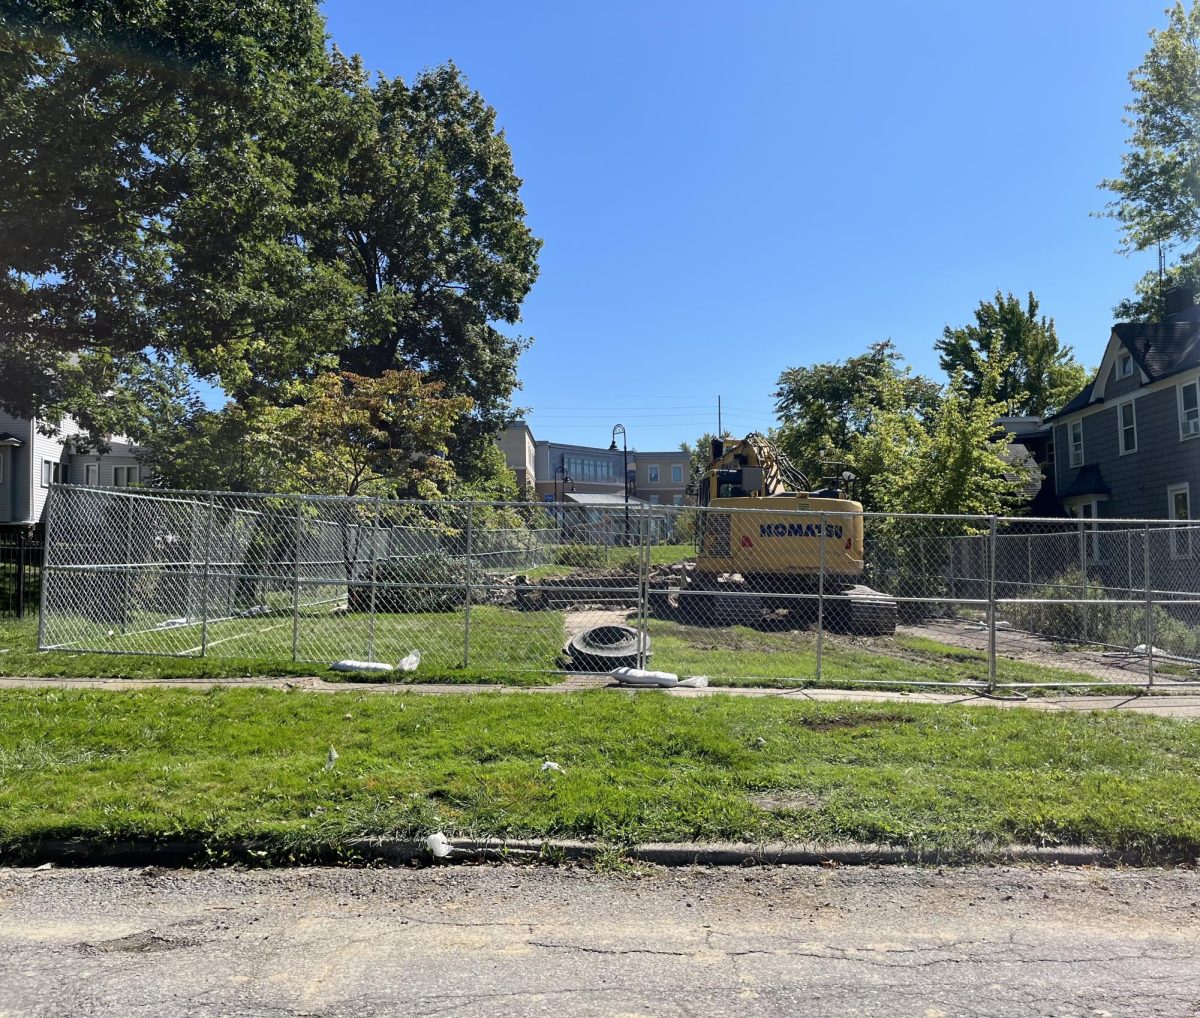 A duplex with addresses 428 and 430 E. College Ave. is demolished as of Sept. 1, 2023. In 2011, the Kent State Board of Trustees authorized the purchase of the duplex for $230,000.